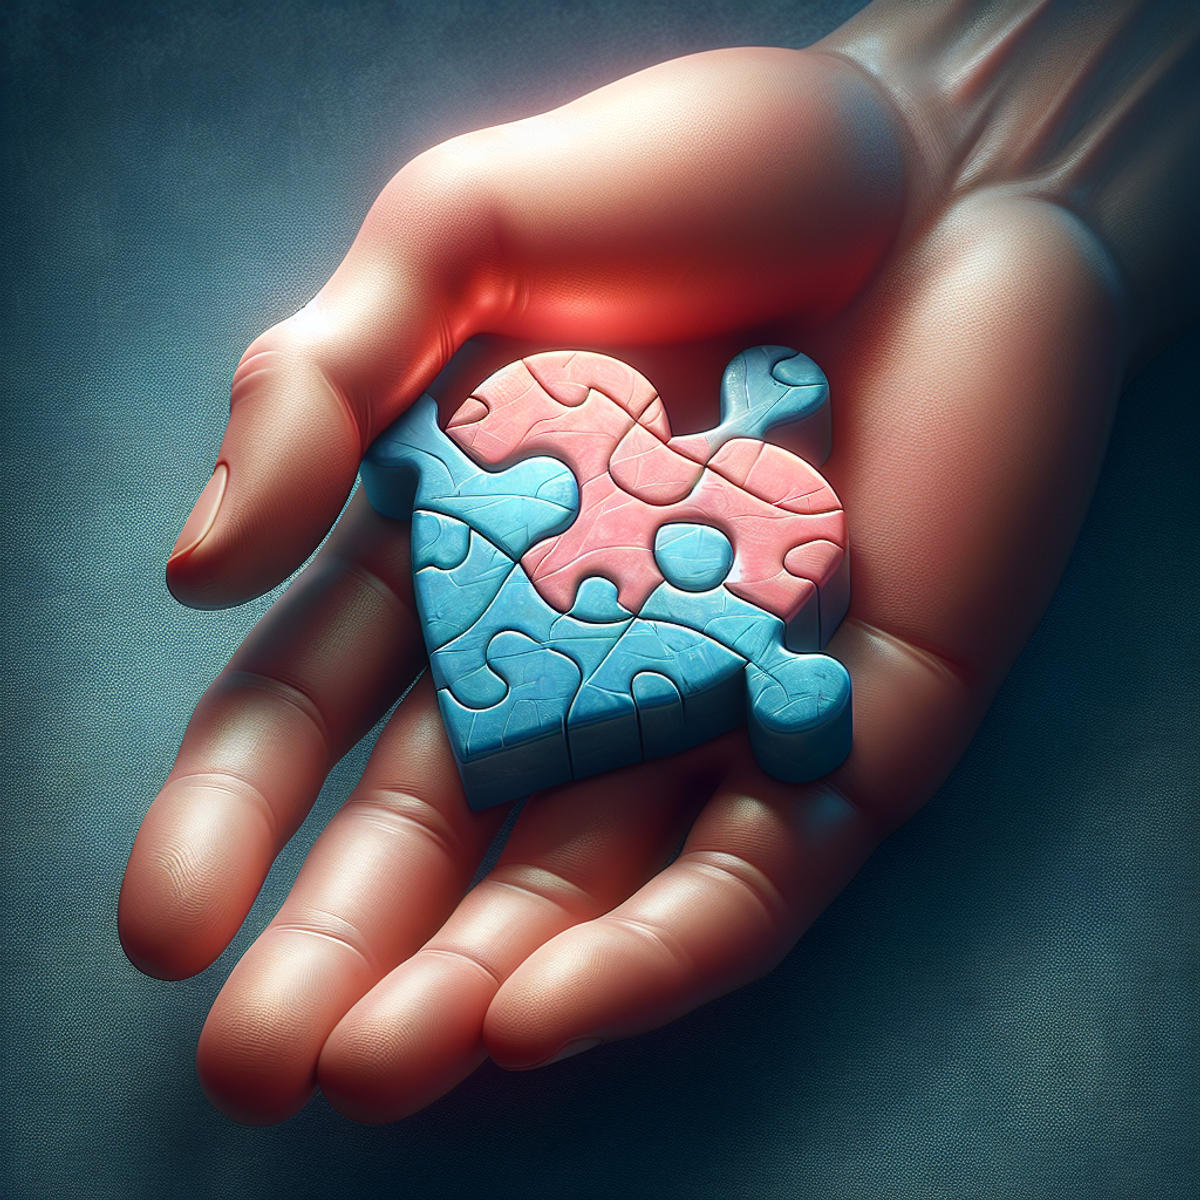 A human hand holding a heart-shaped puzzle piece with care and compassion.